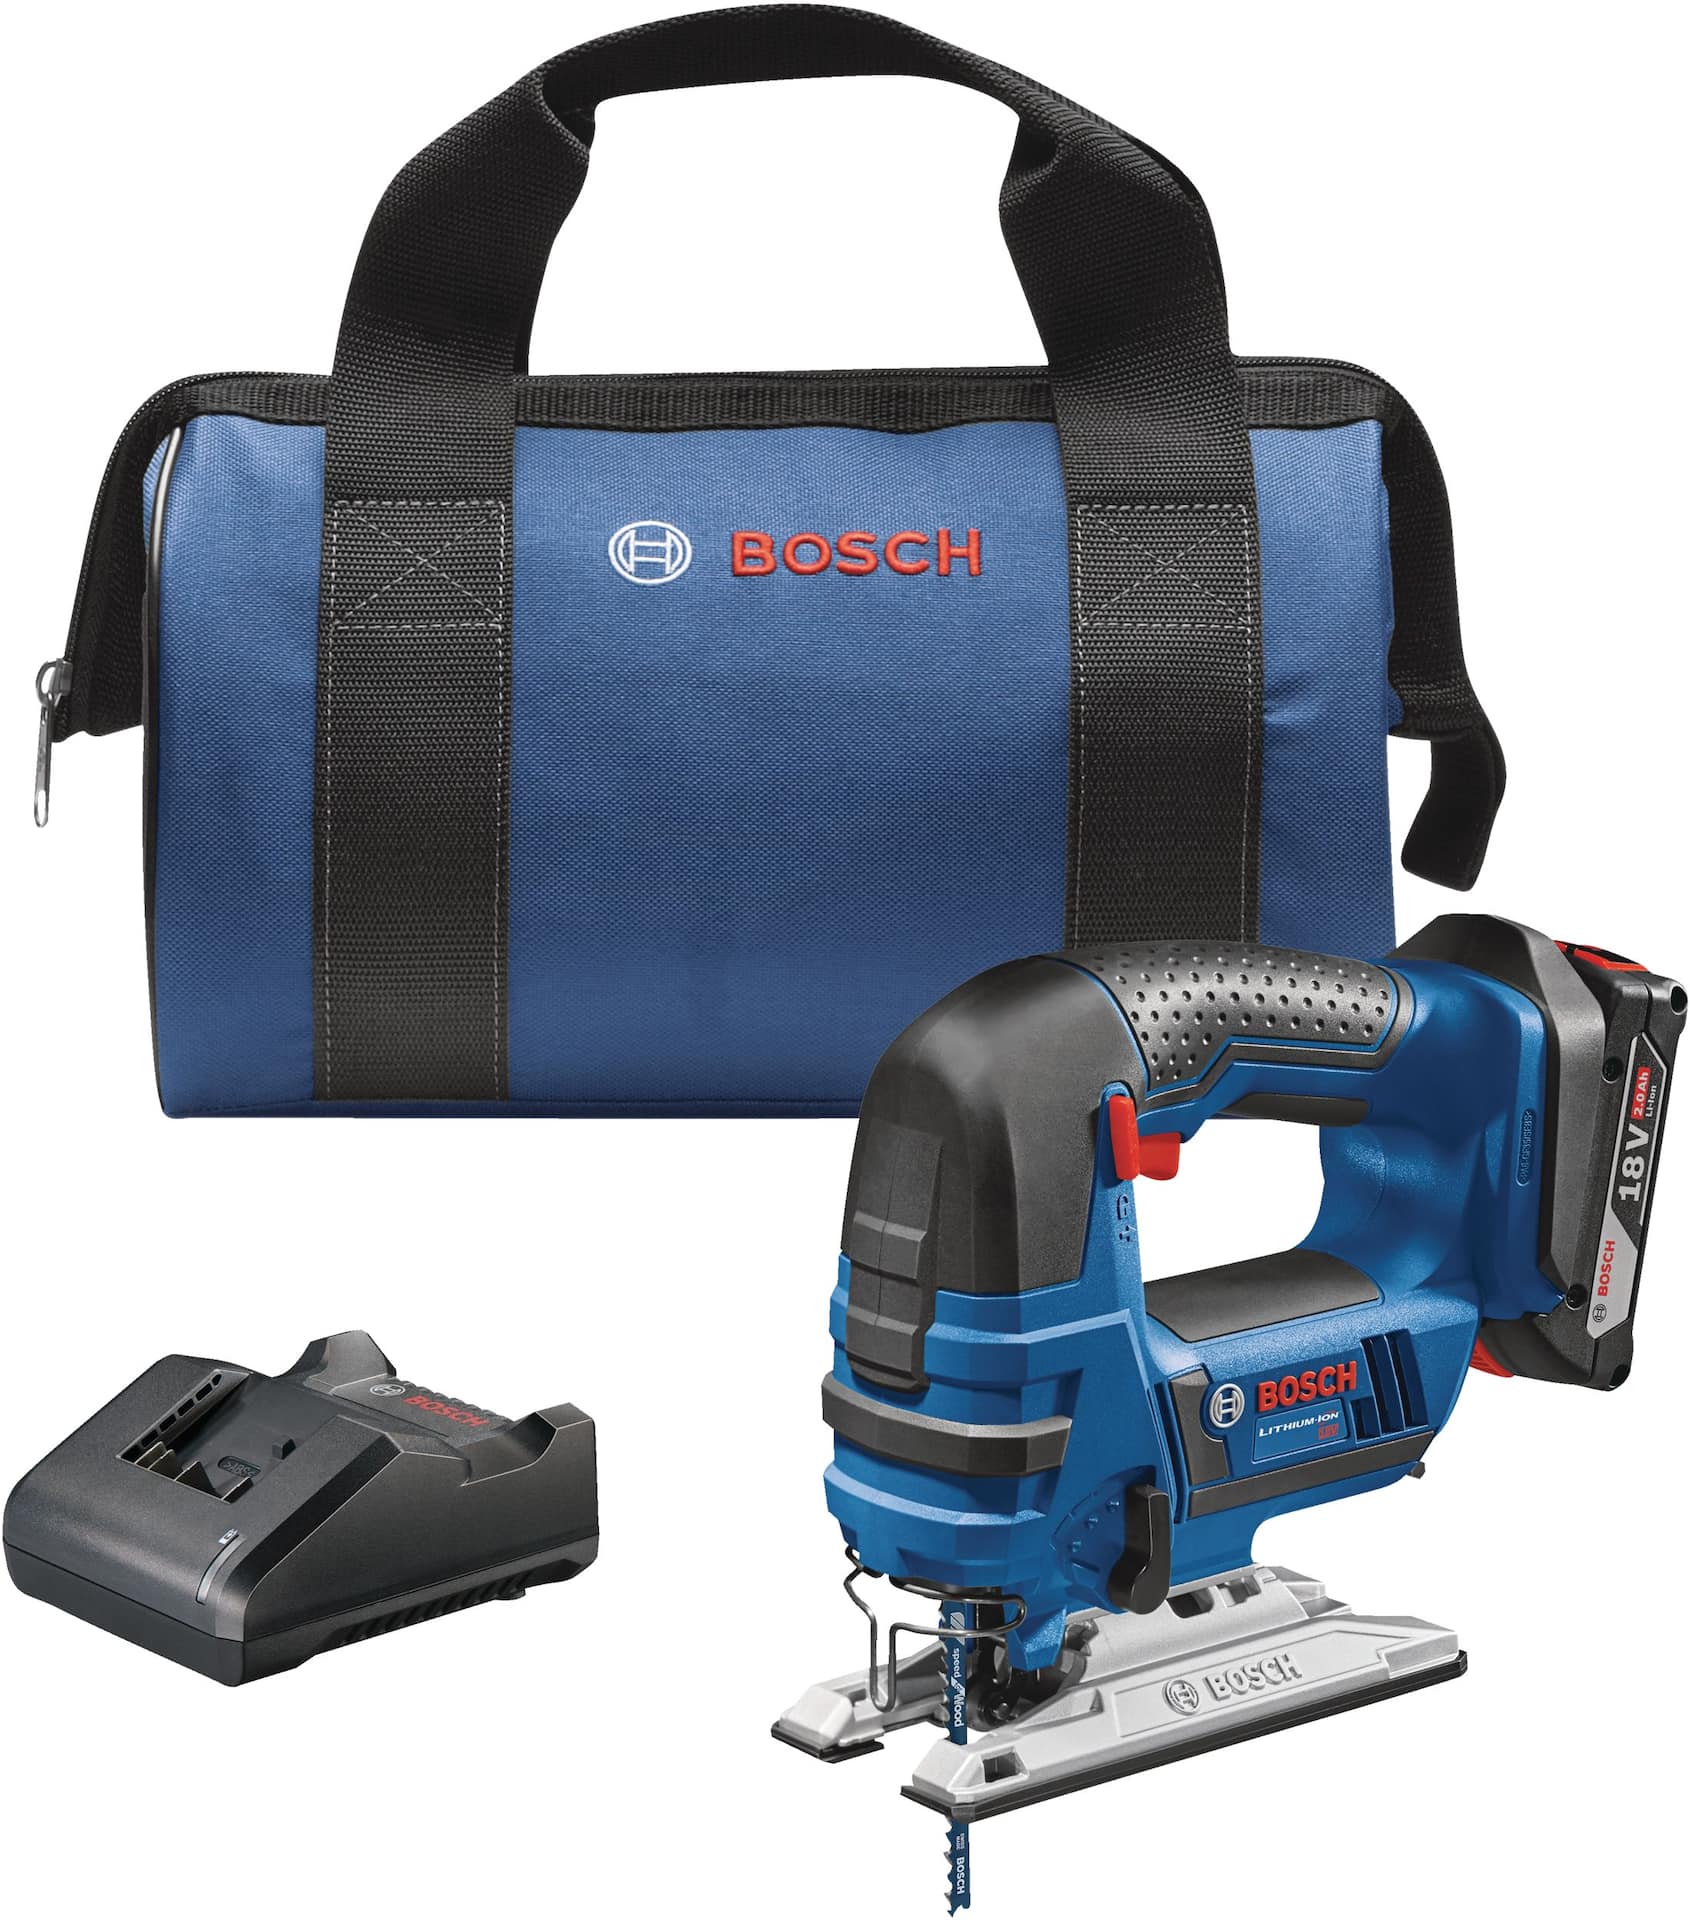 Bosch 18v 6 battery charger review 